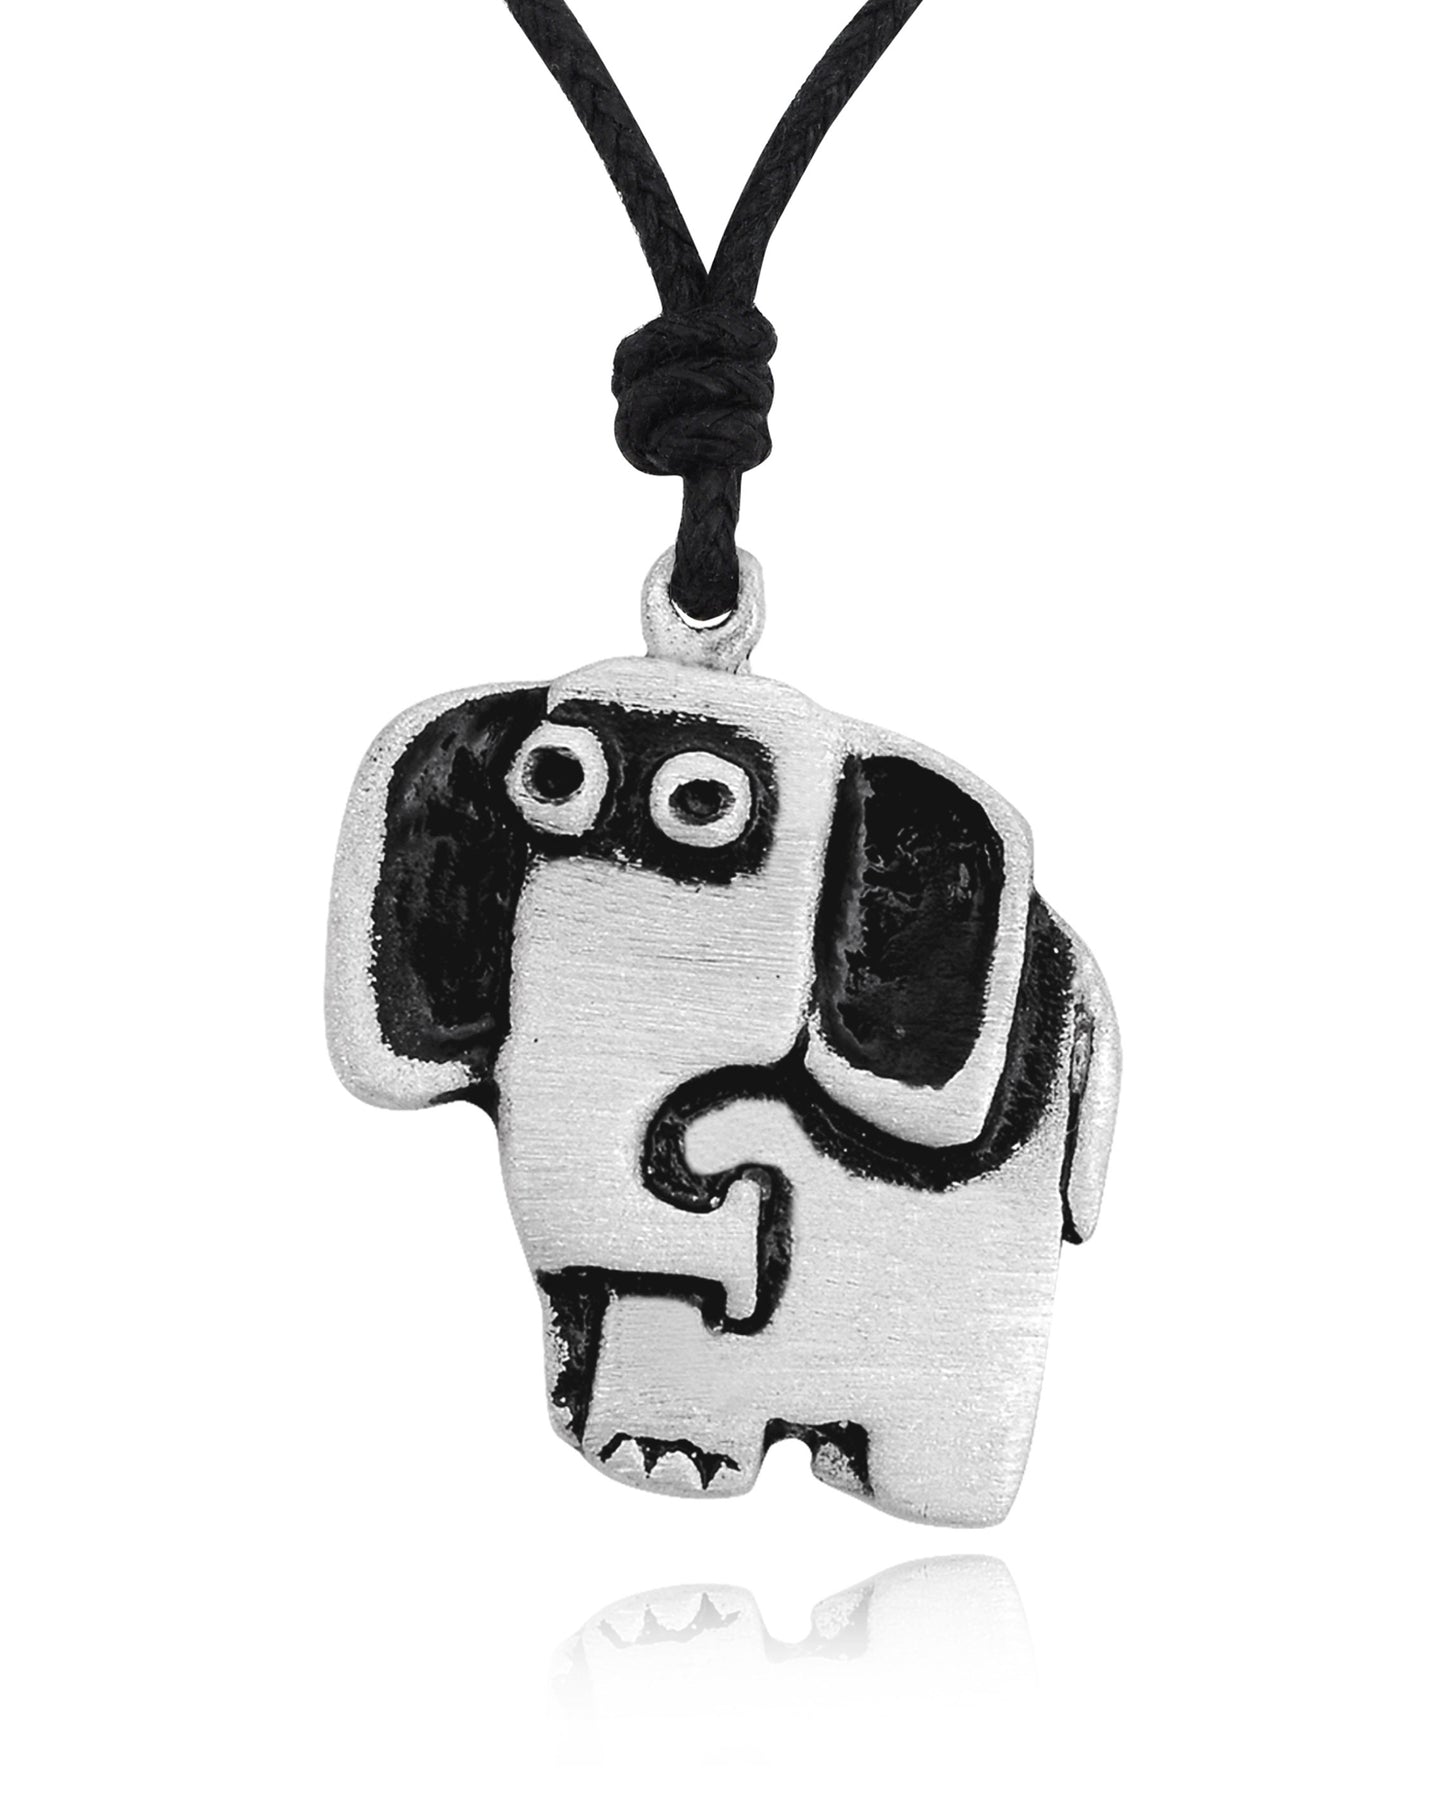 Thai Elephent Silver Pewter Charm Necklace Pendant Jewelry